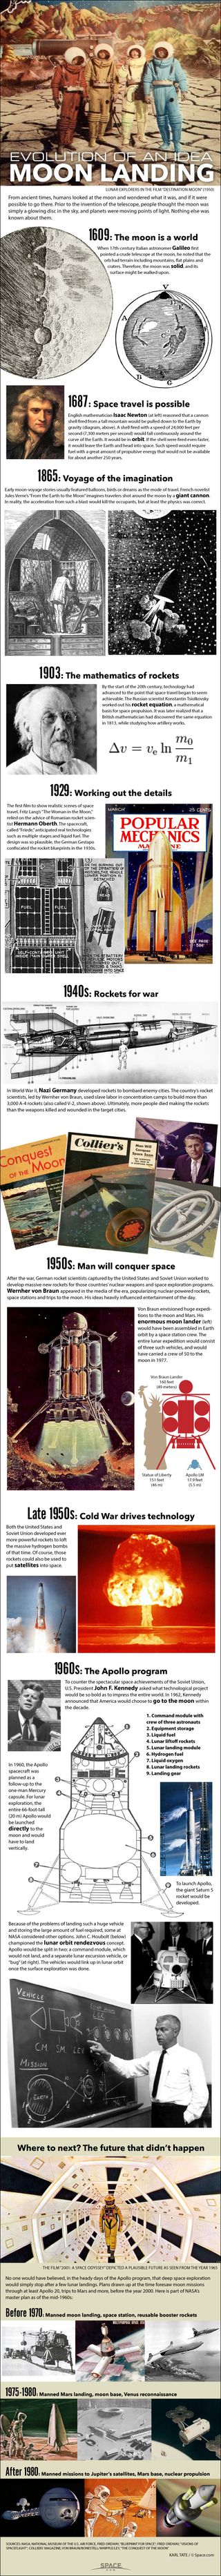 For centuries before Apollo 11 landed on the moon, the idea of going there stirred people's imaginations. <a href=http://www.space.com/26541-moon-exploration-350-year-history-infographic.html>See Space.com's complete look at humanity's love affair with the moon in this infographic</a>.